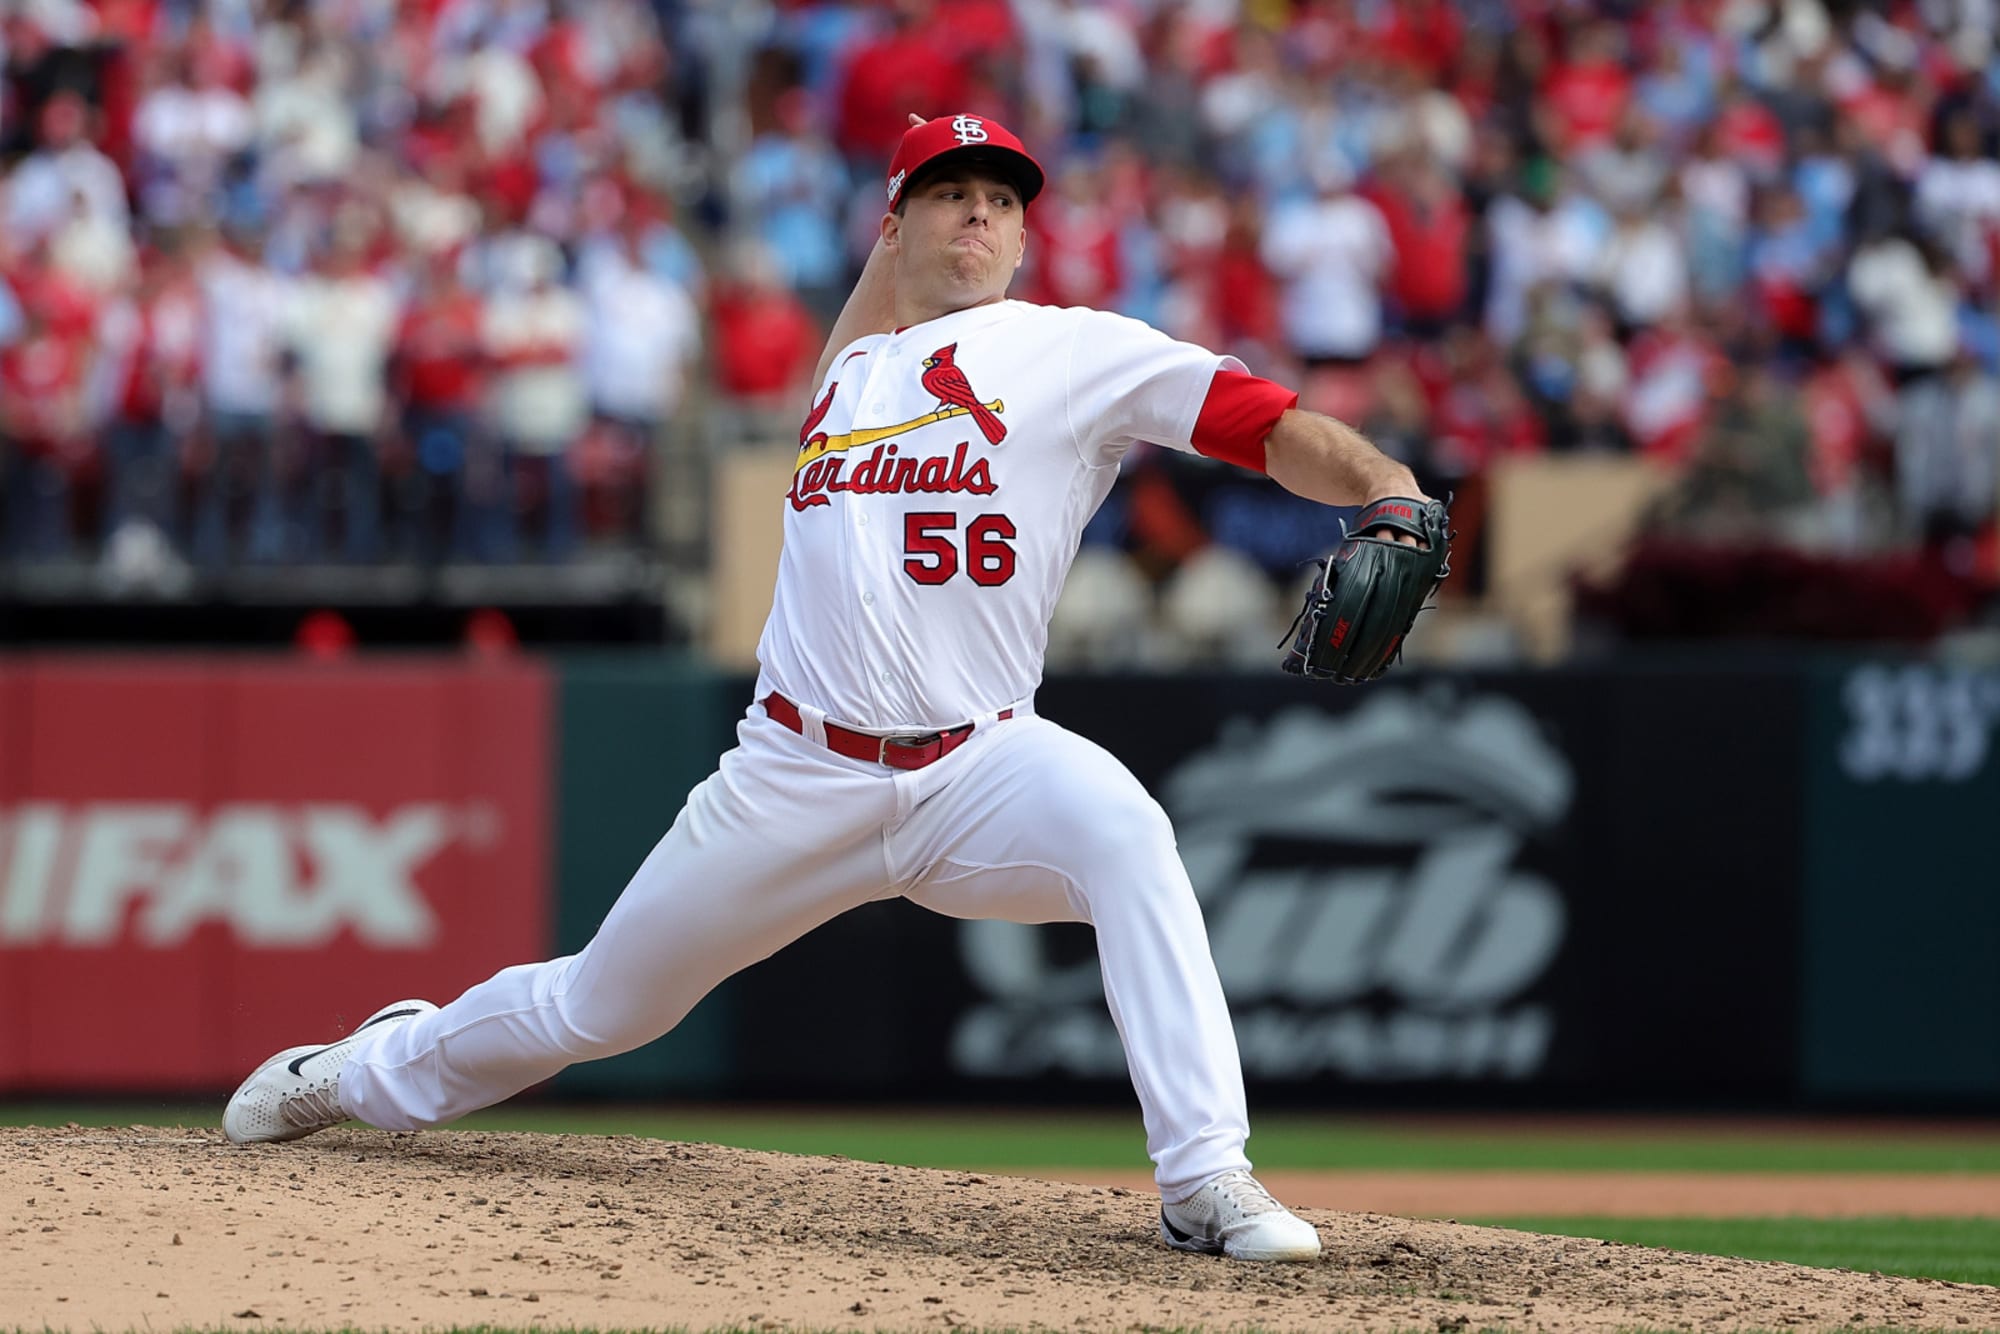 Fans react to Cardinals pitcher drastic hairstyle change